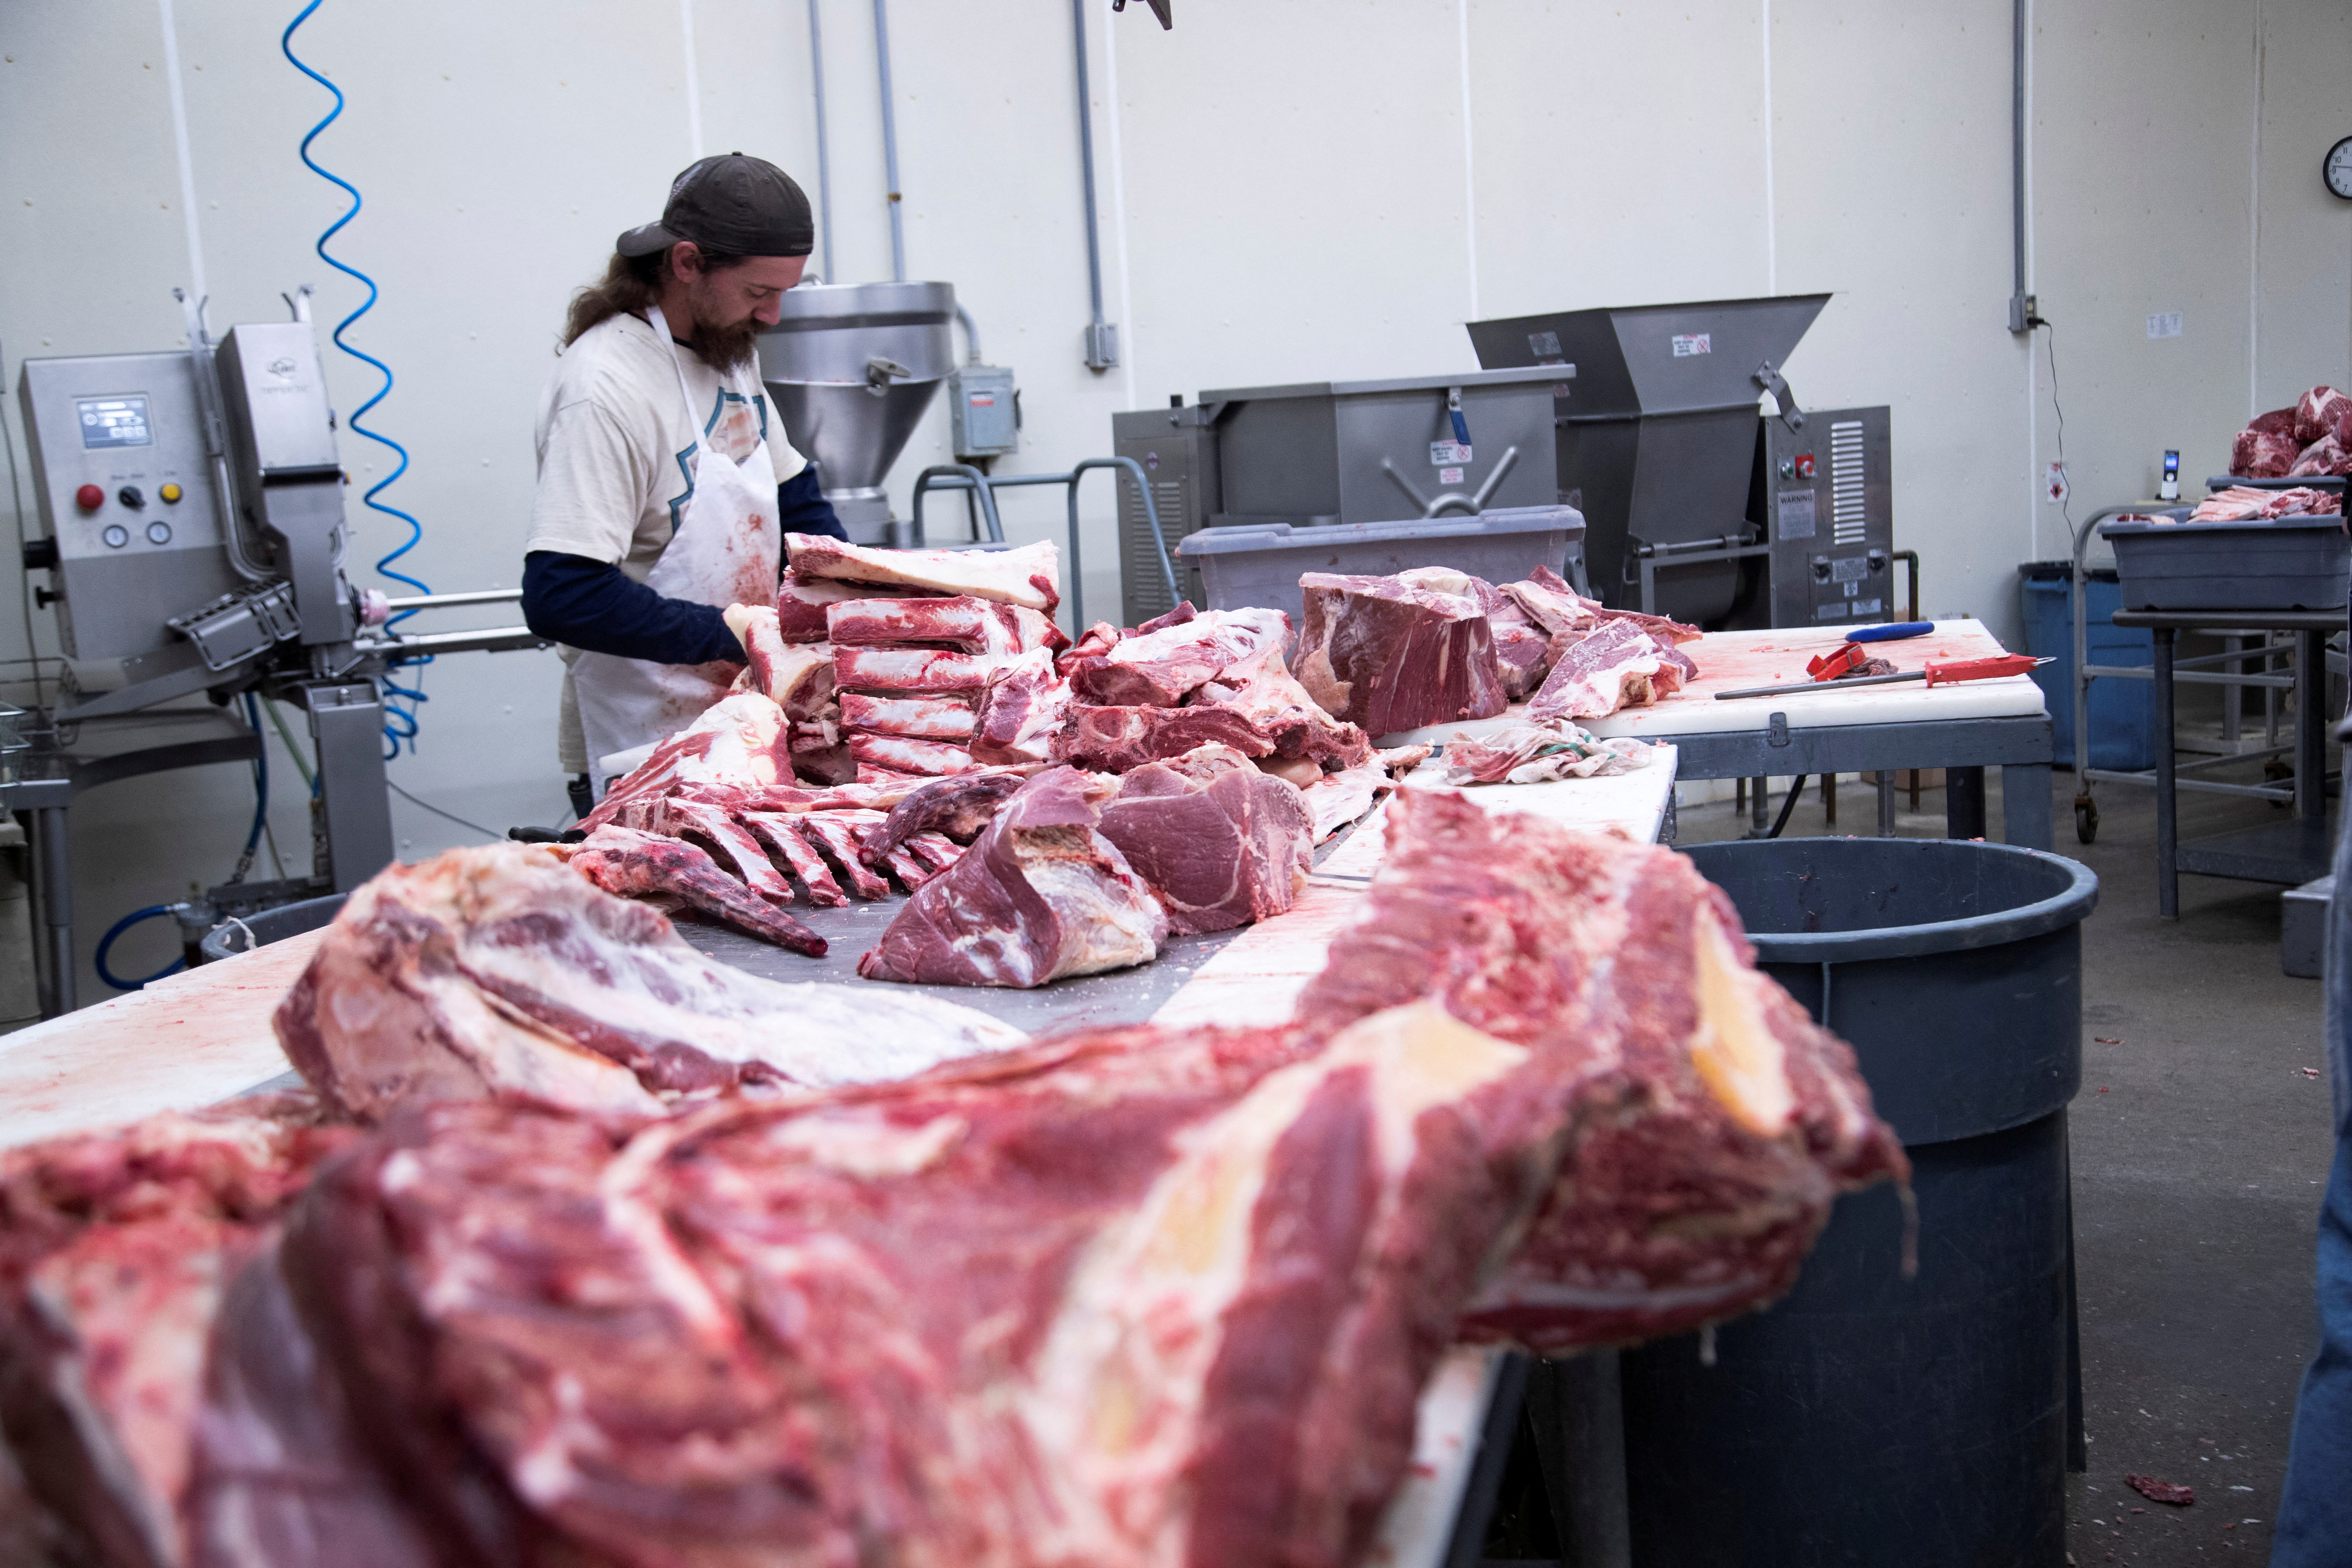 Employee cuts fresh beef meat into large pieces at a meat processing plant in Indiana